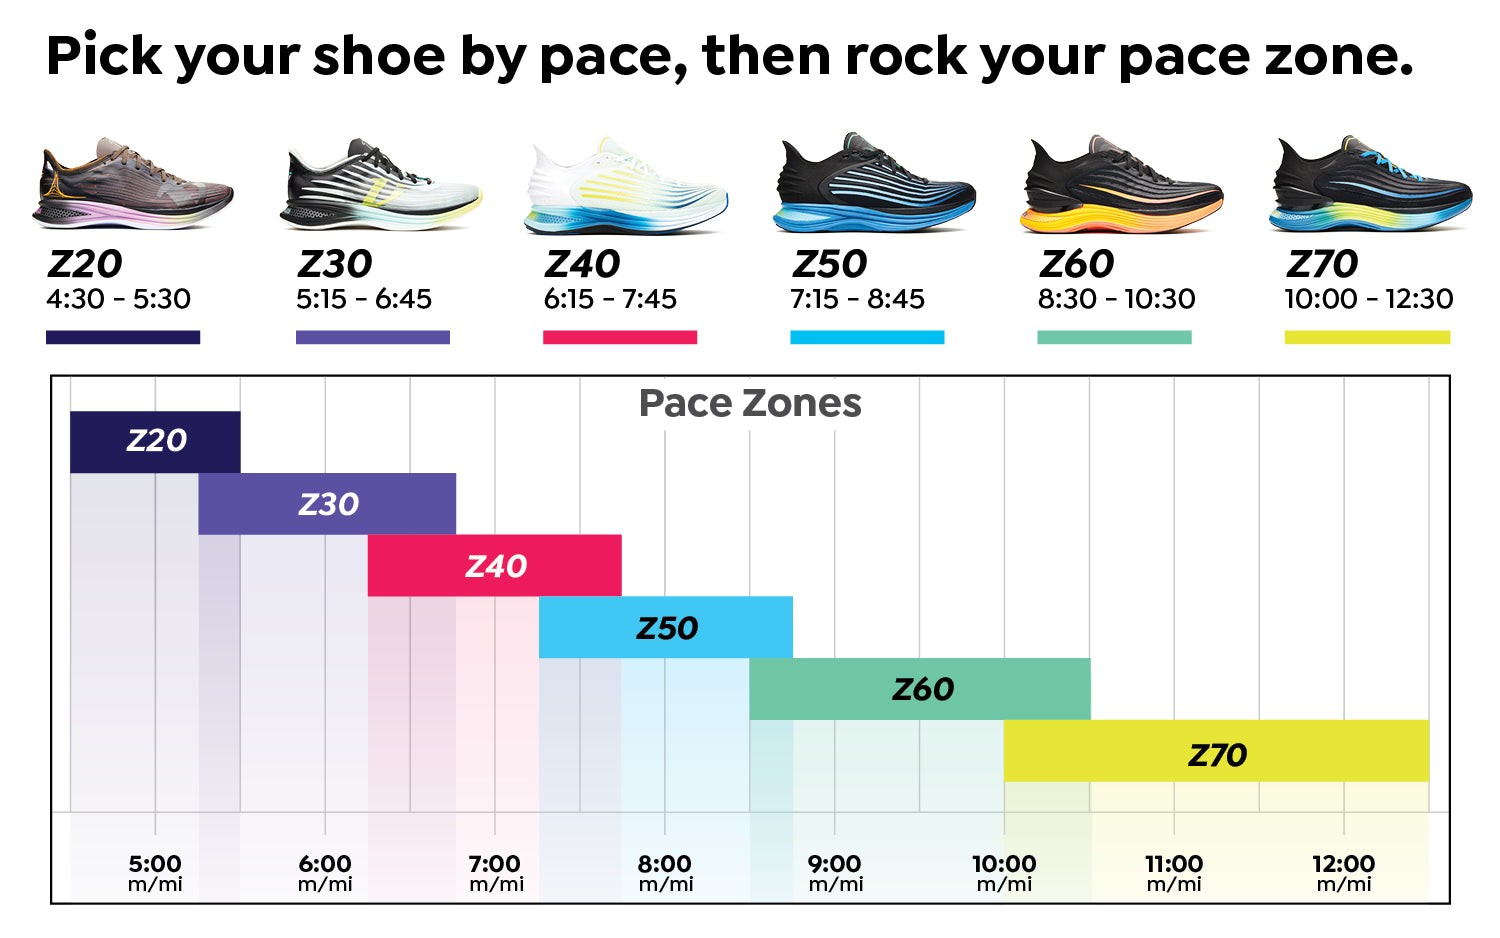 What are pace zones?